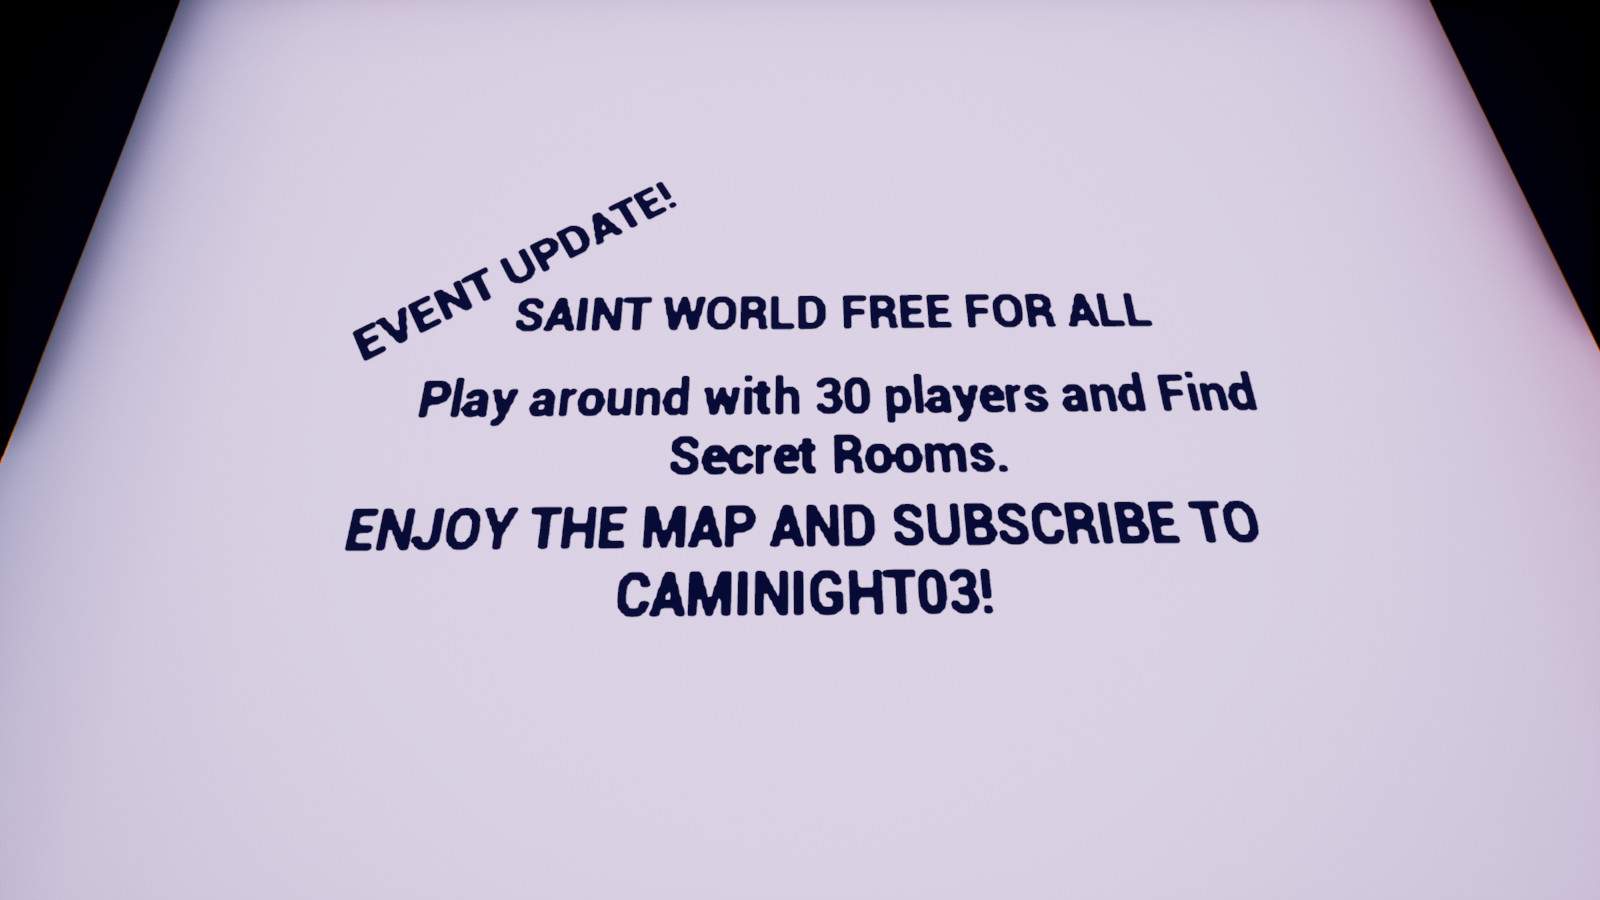 SAINT WORLD FREE FOR ALL